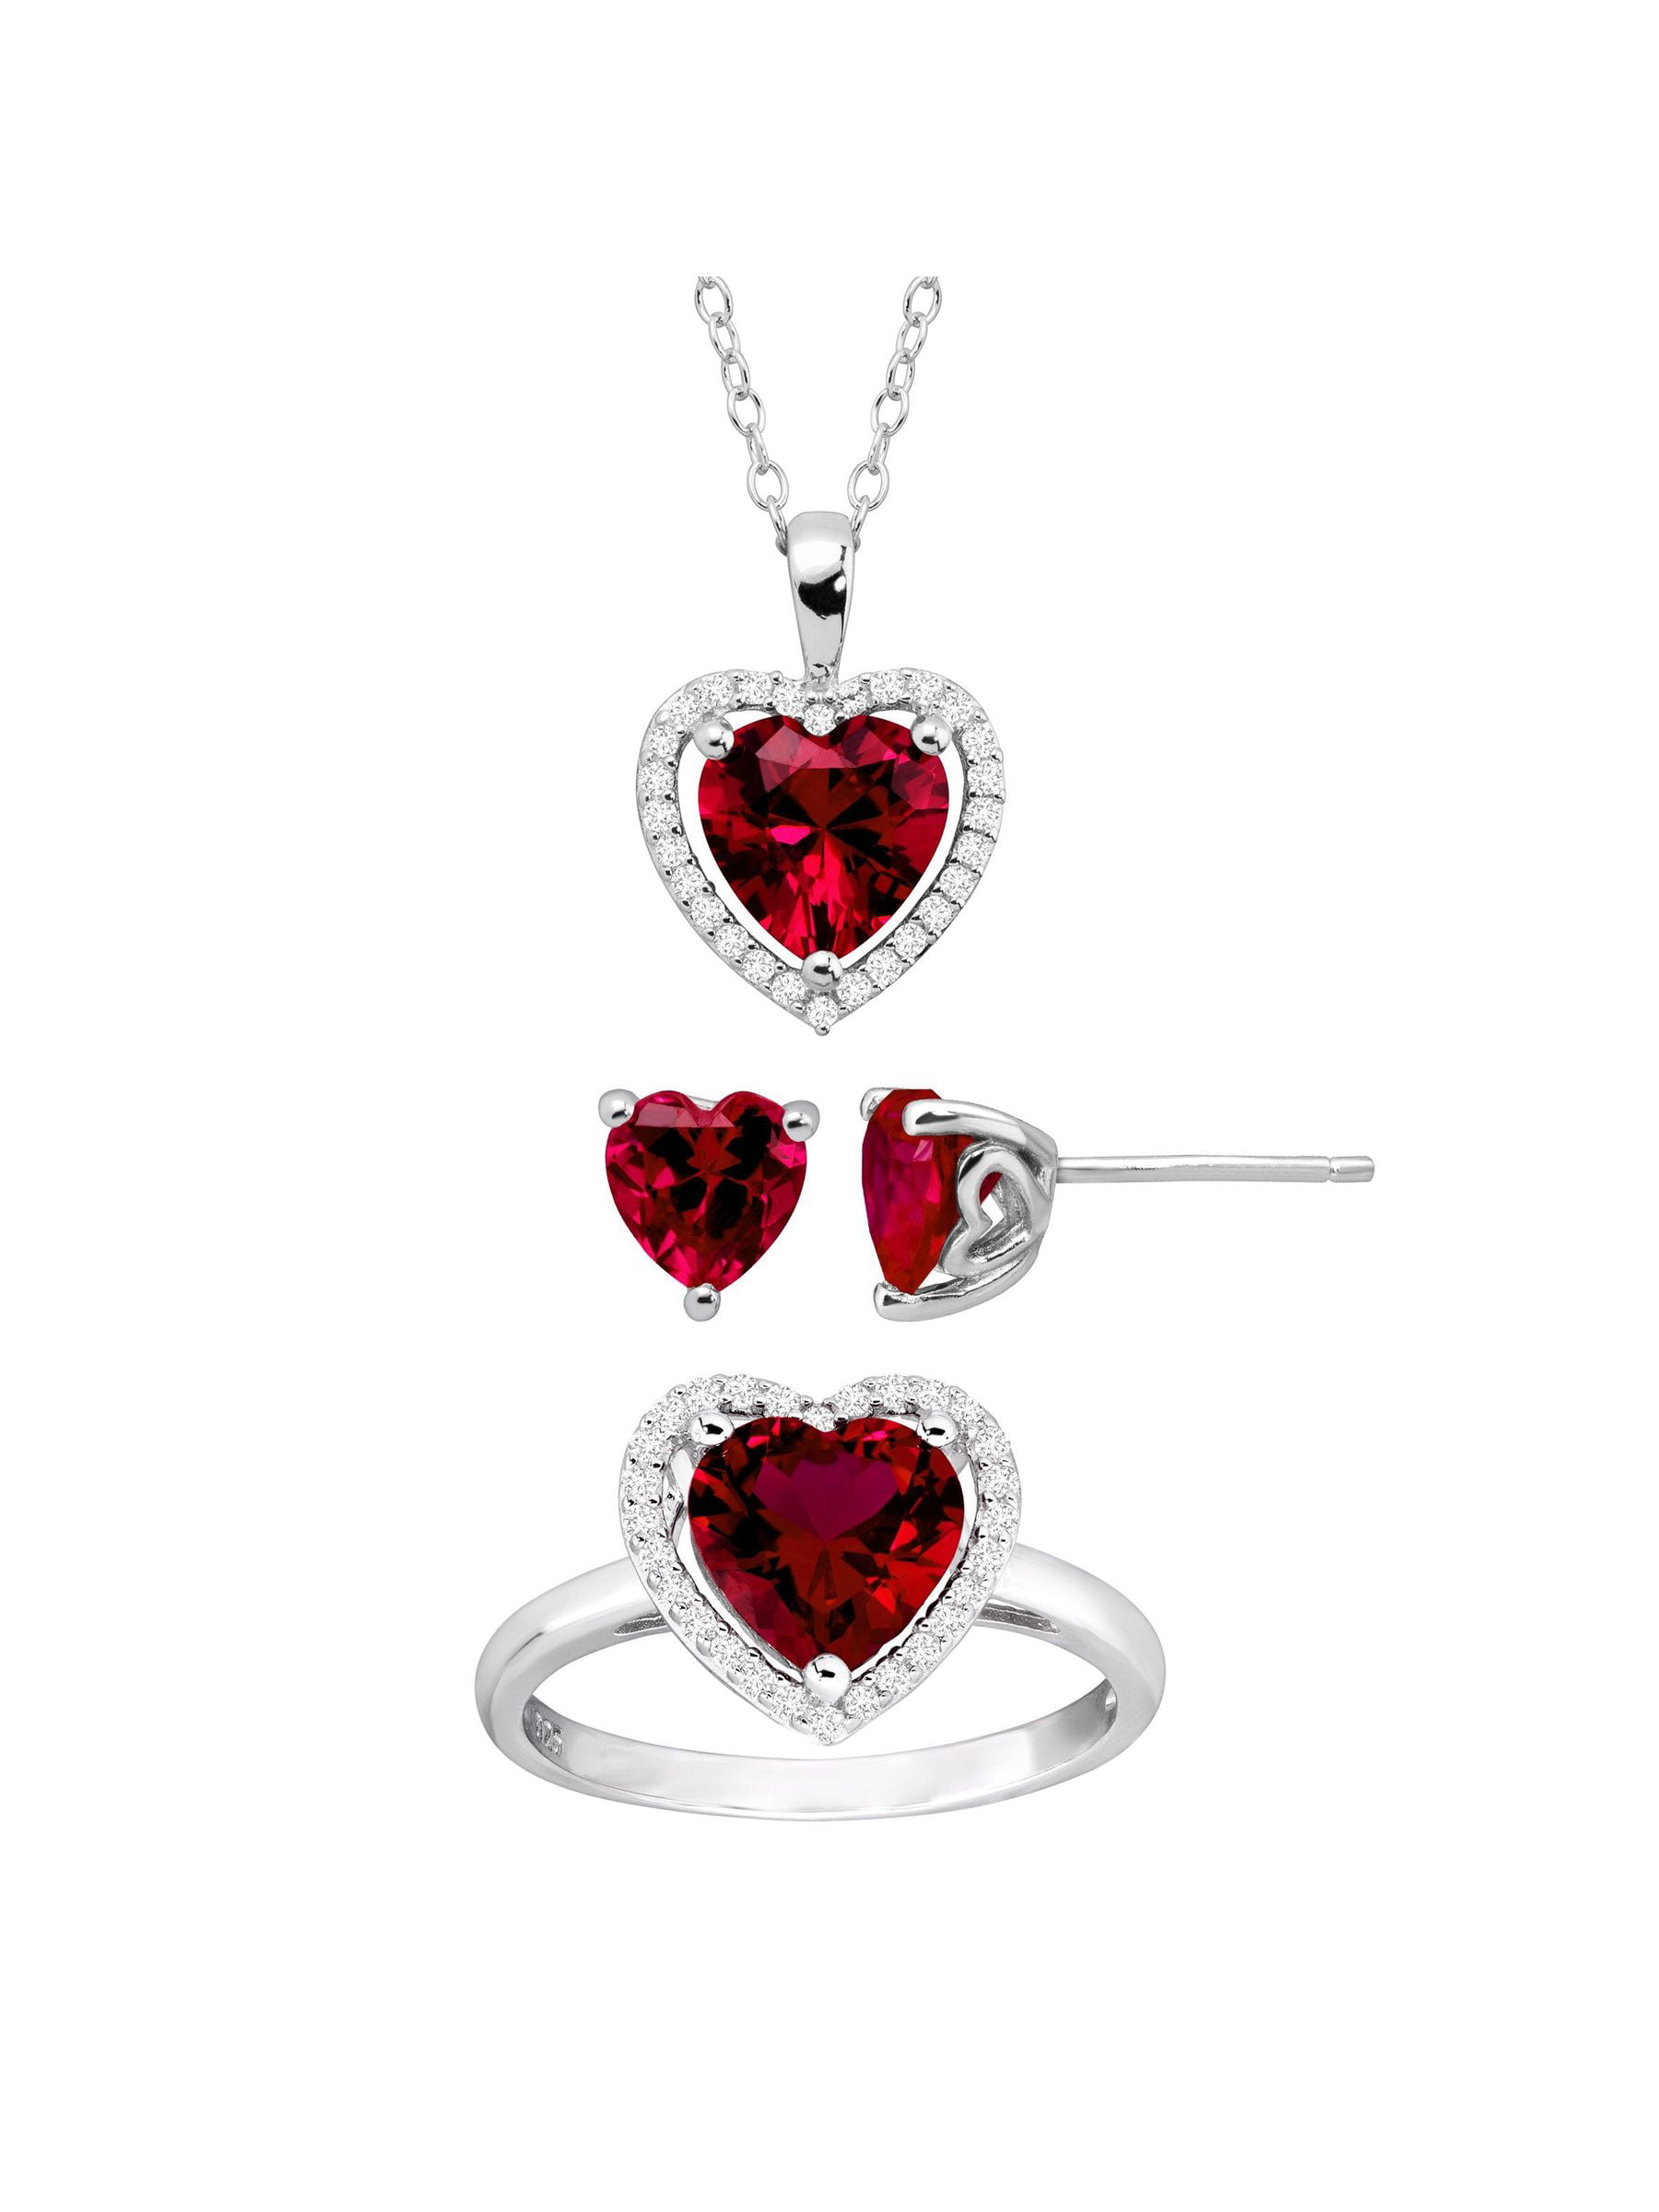 With 18 Chain Set of Sterling Silver Pendant and Earring in Ruby 